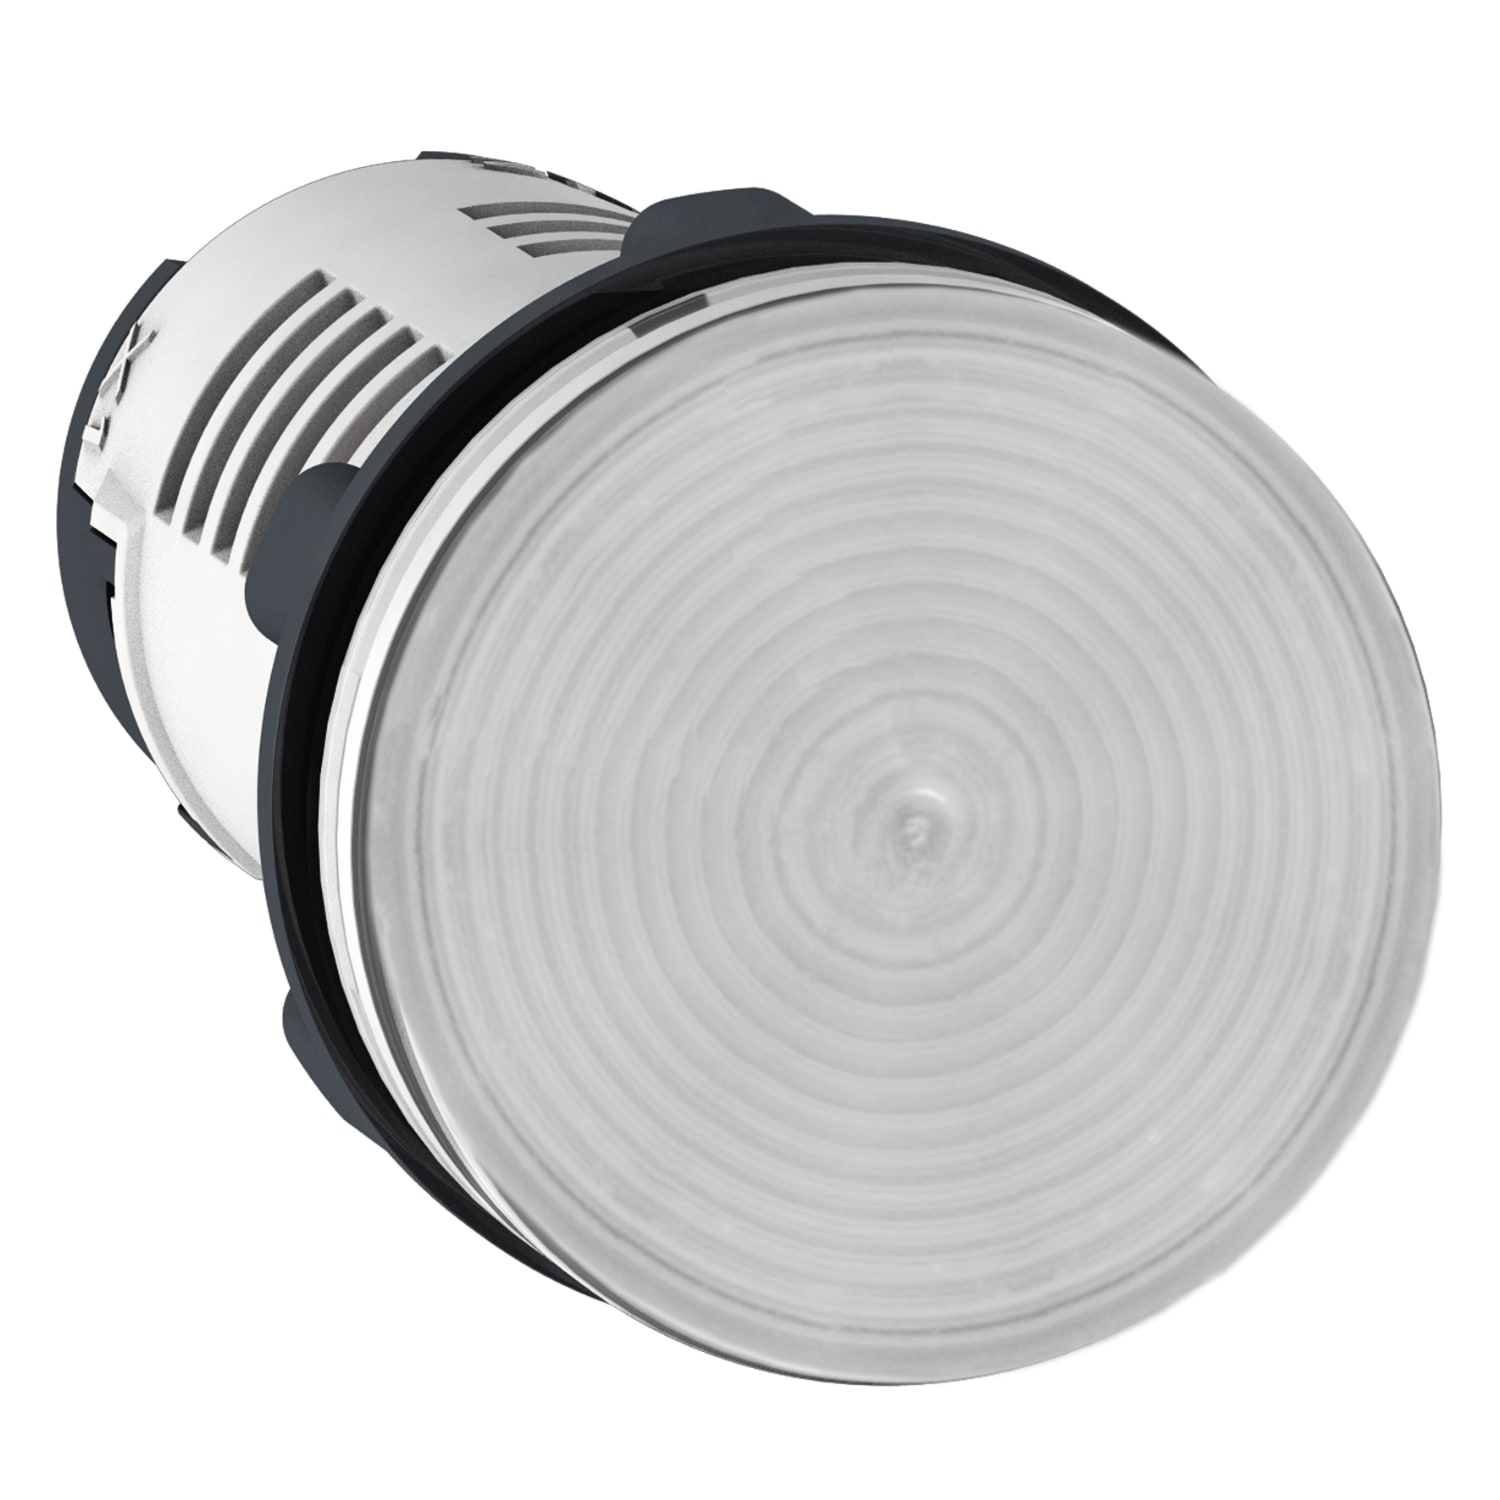 Schneider Electric - Harmony voyant rond - D22 - incolore - LED integree - 24V